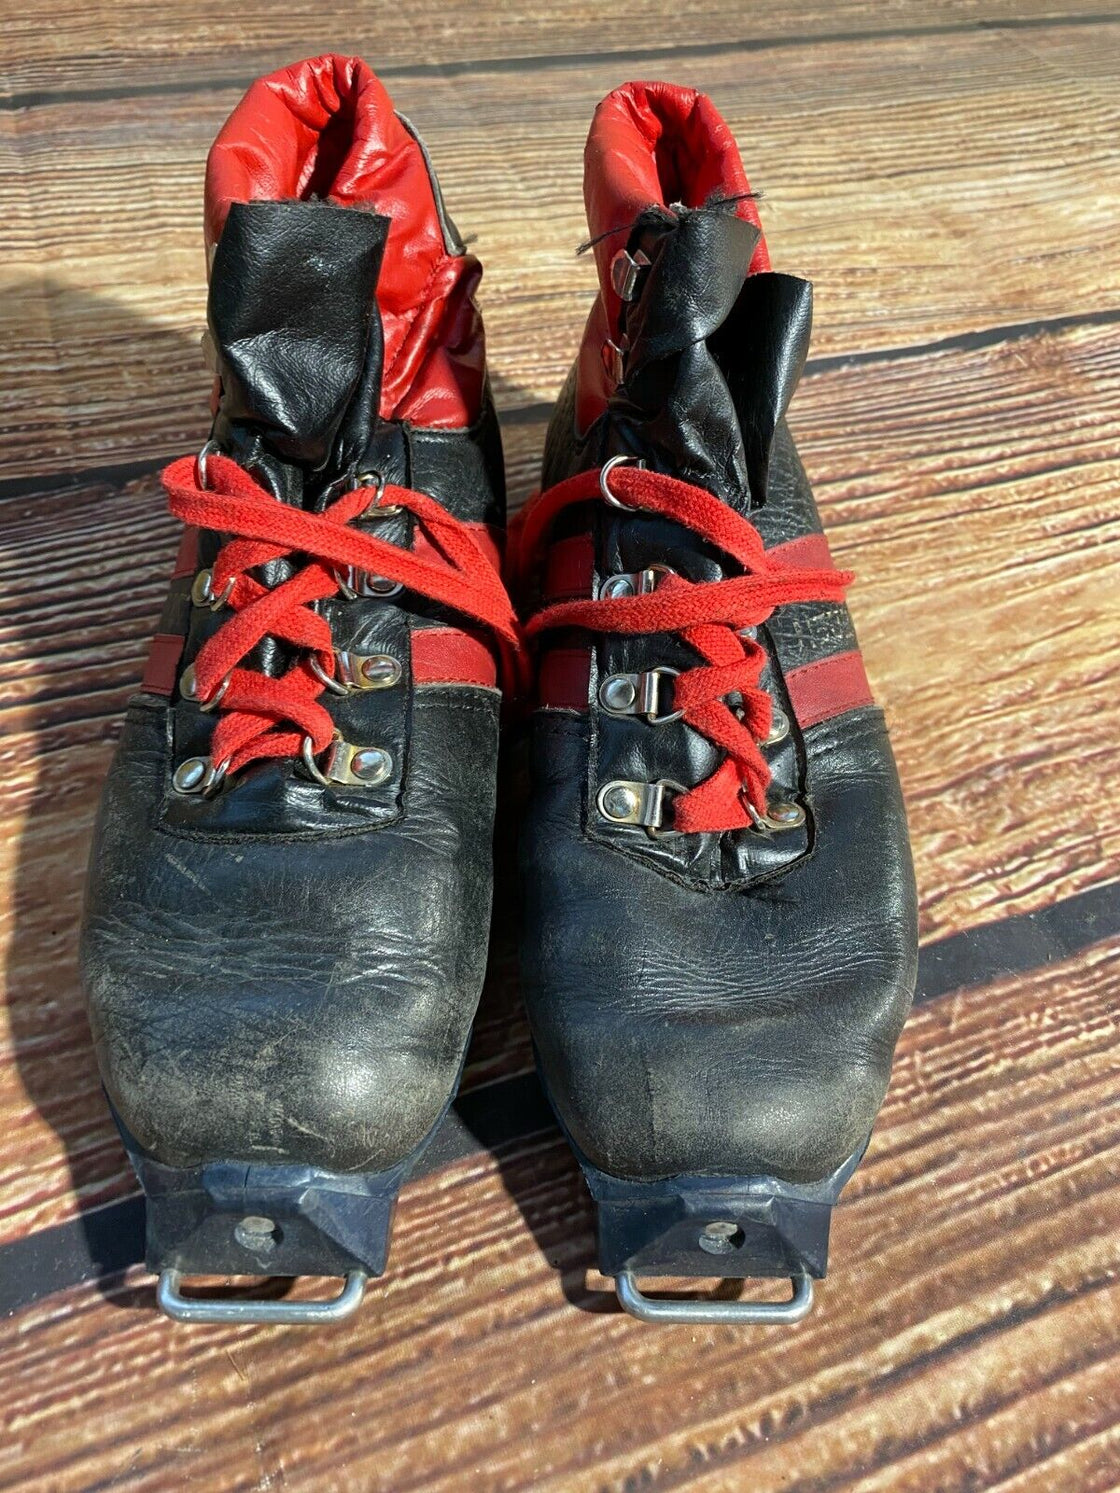 SUVEREN Vintage Nordic Cross Country Ski Boots Size EU38 US6 for SNS Old